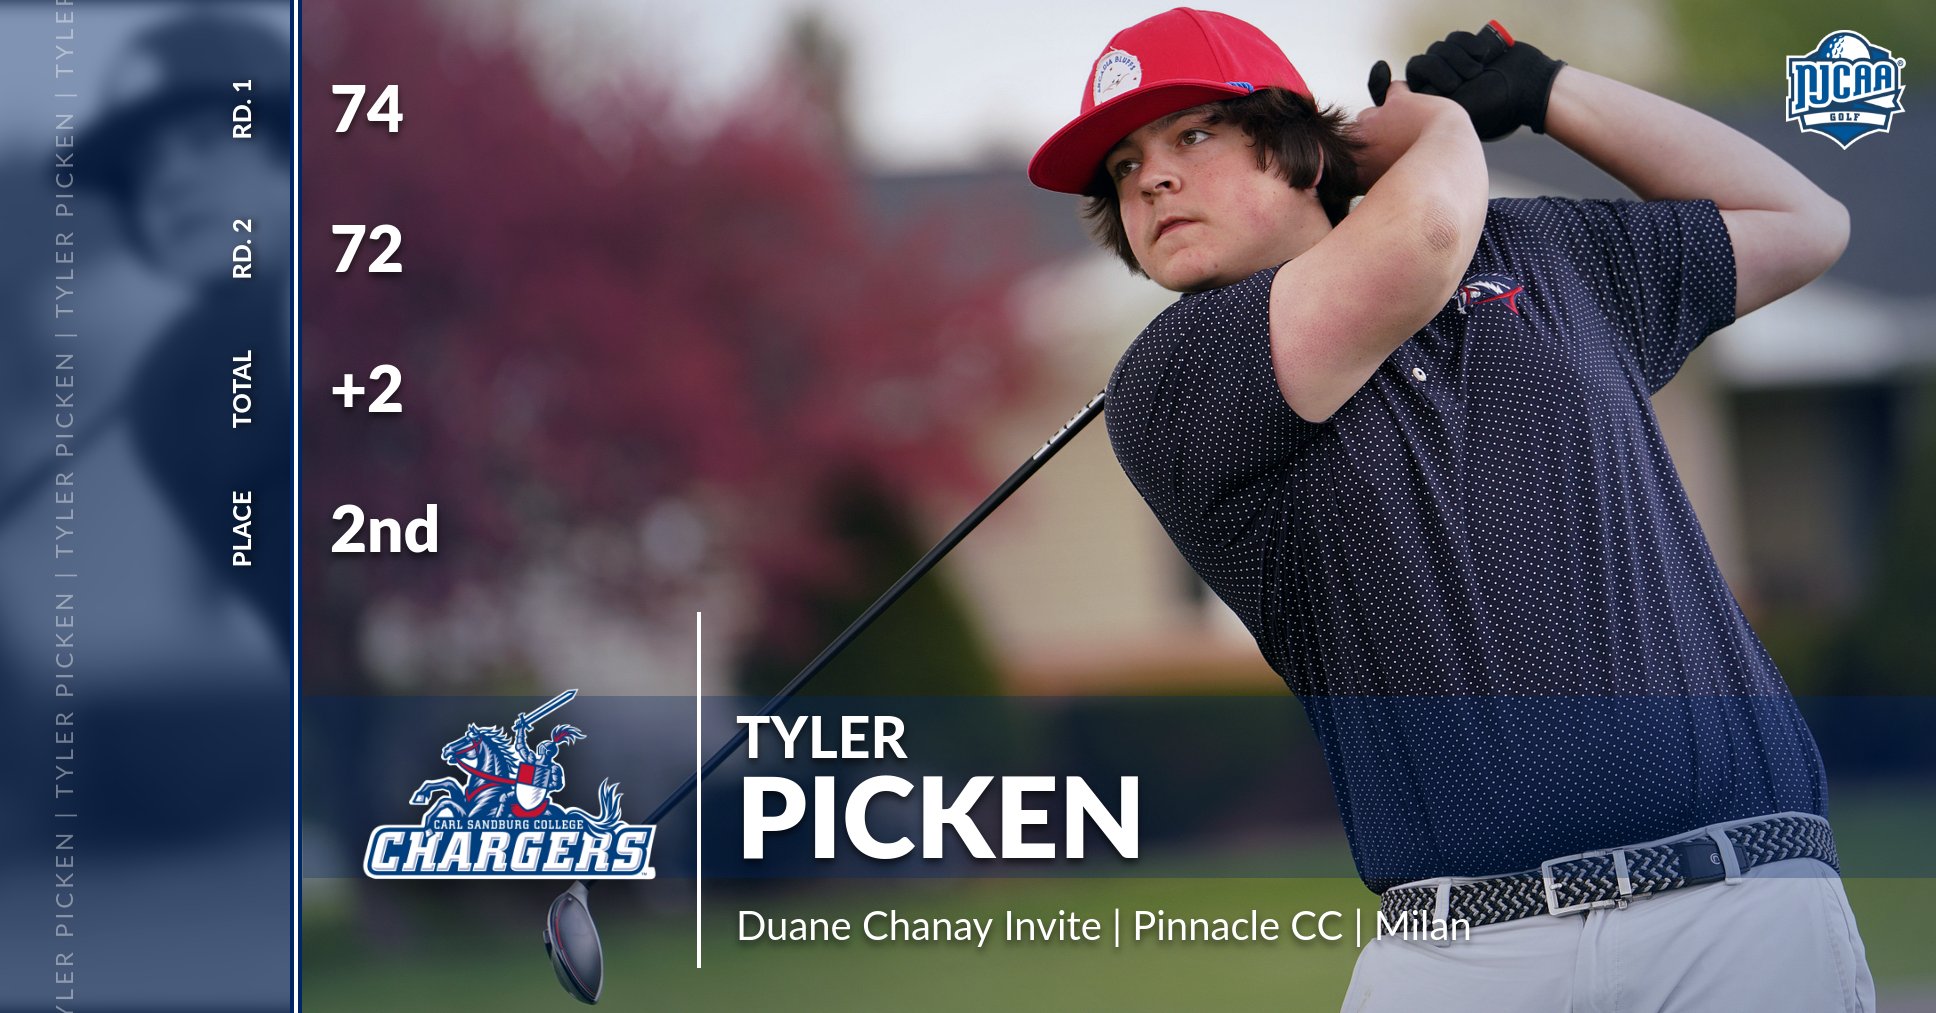 Picken Shoots 2 Over for Tourney, Takes Runner-Up in Playoff at Chanay Invite